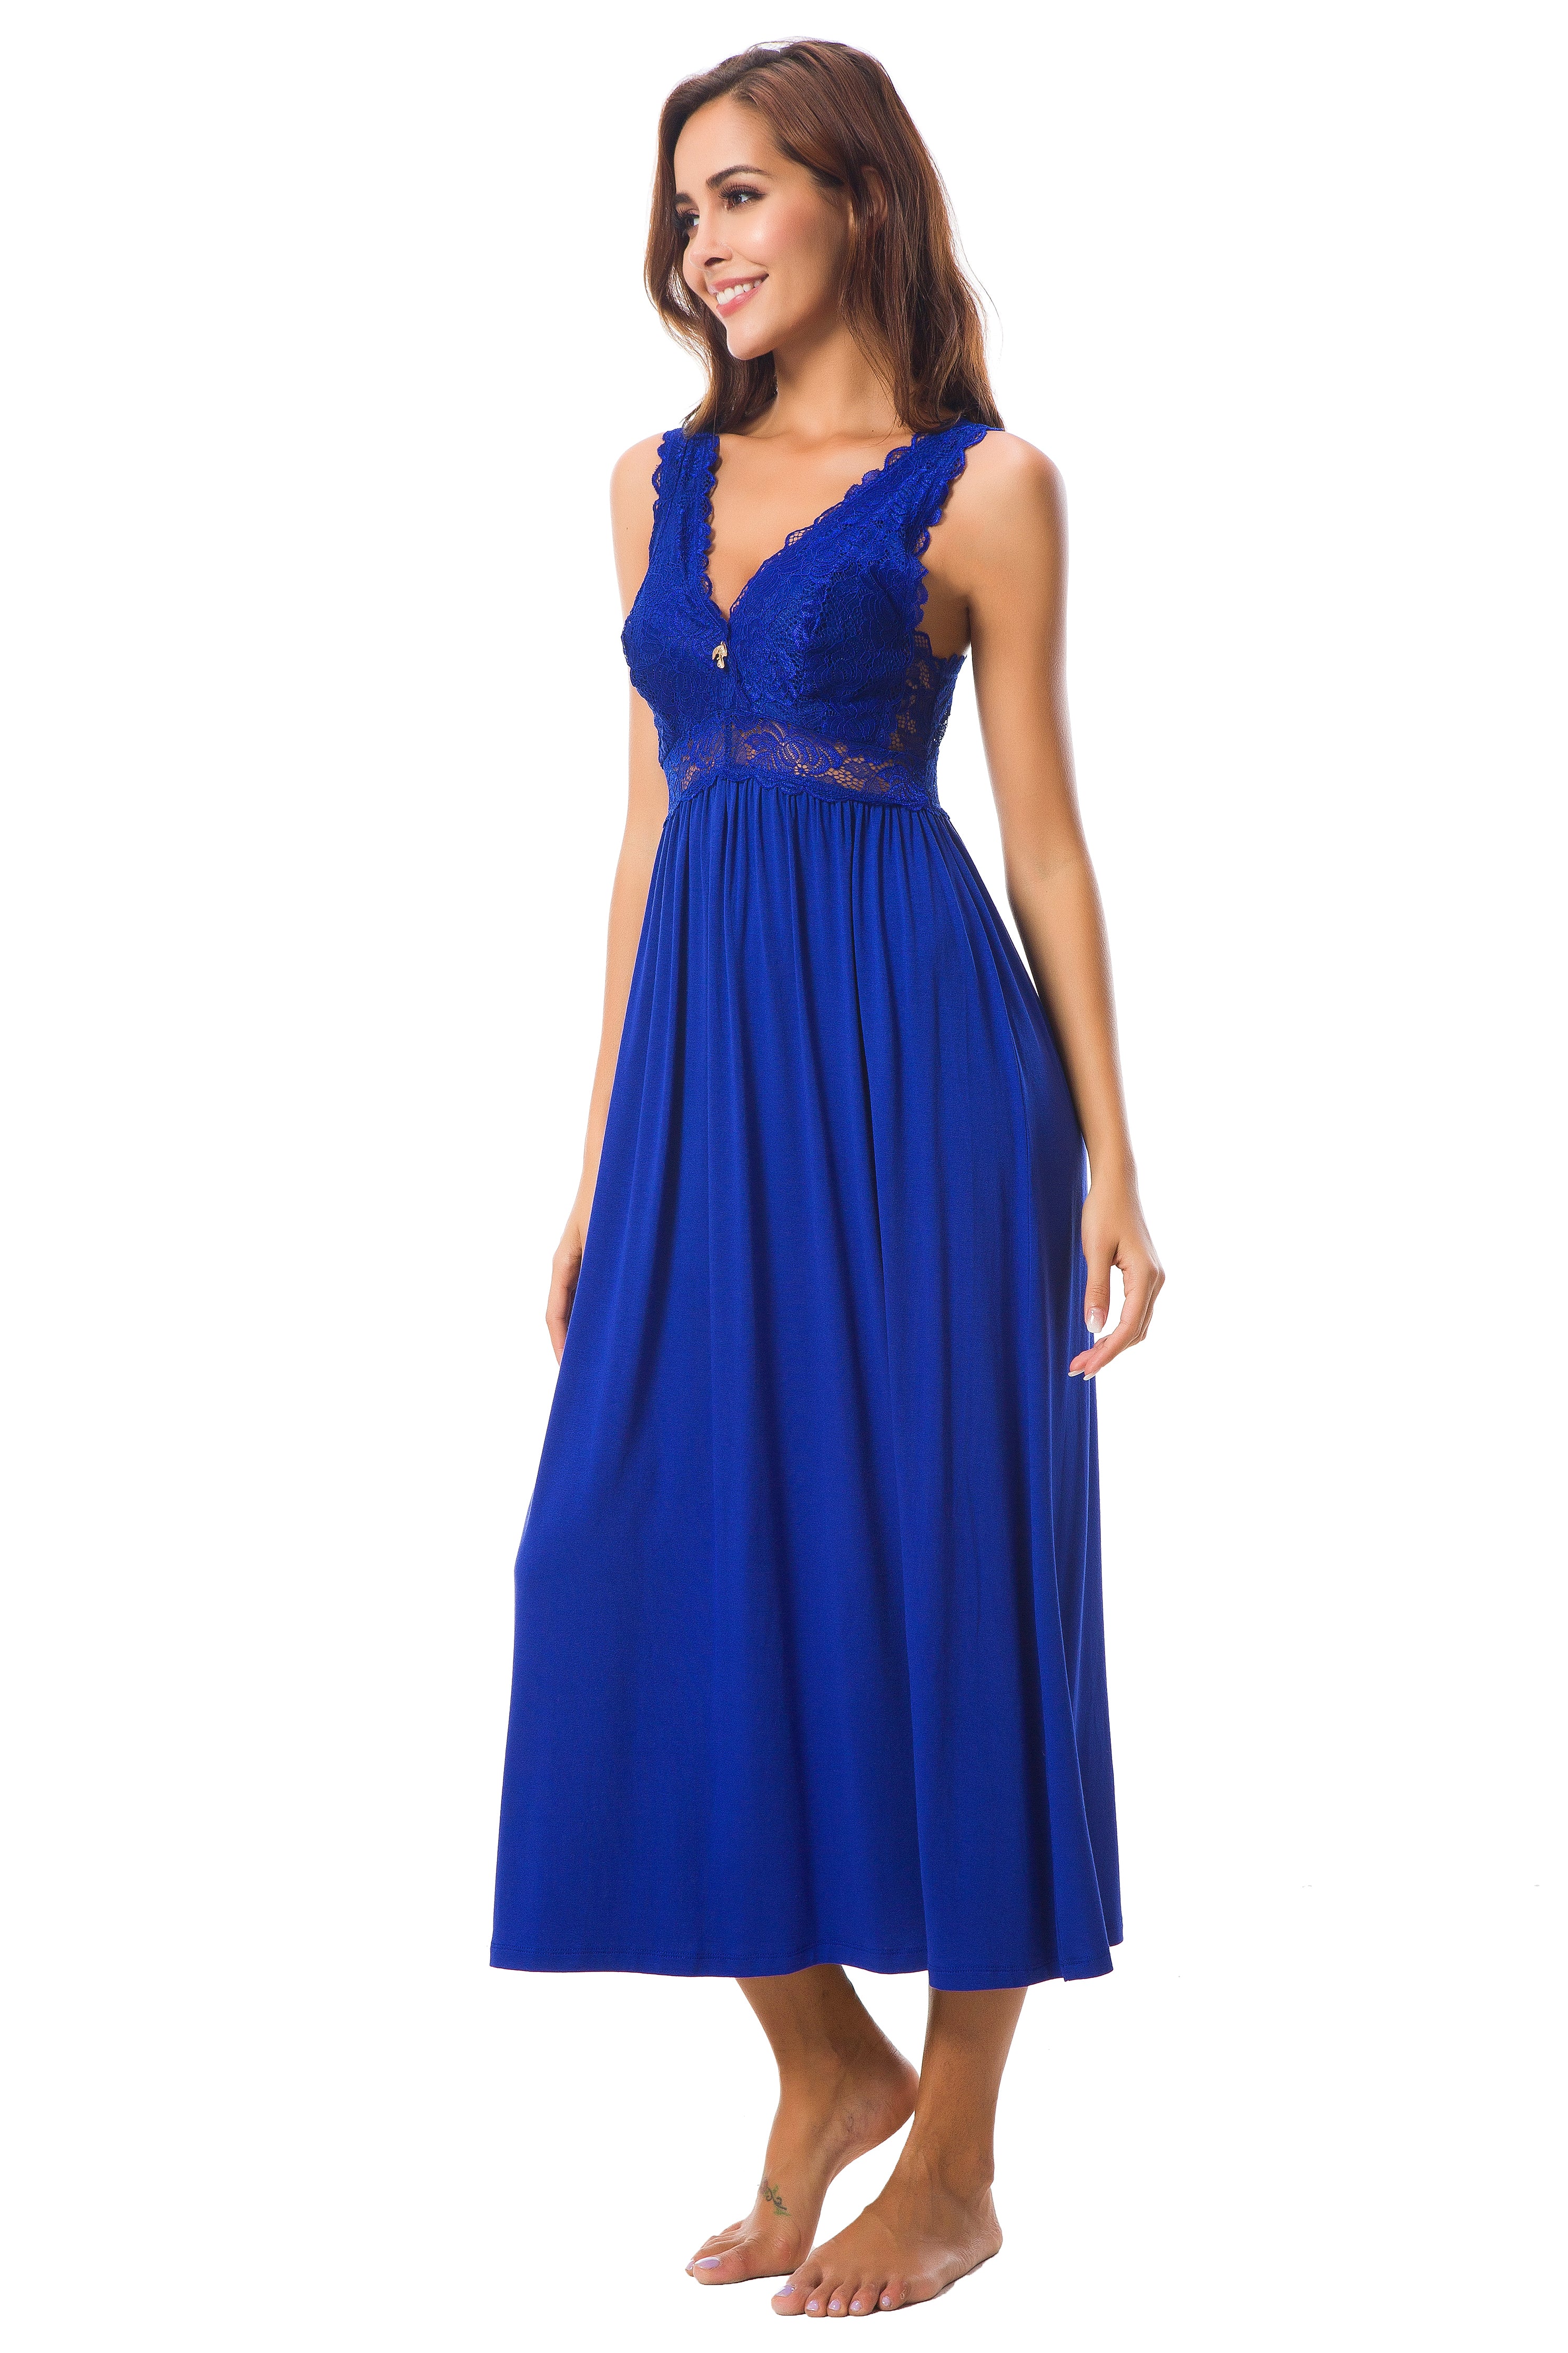 Sexy Lace Jersey Elegant Long Nightgown Chemises Royalblue